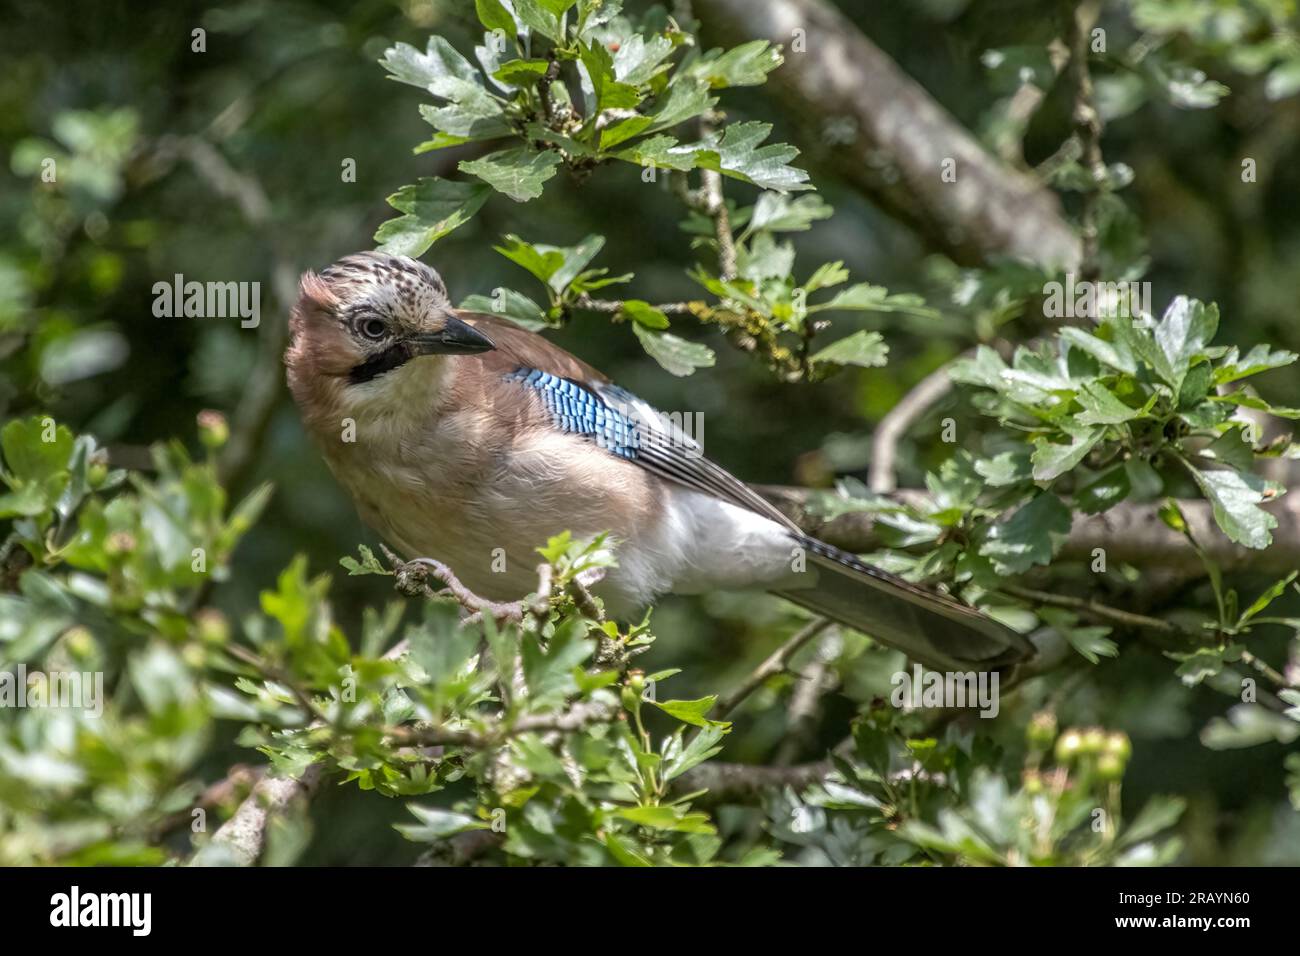 Eurasian Jay a crow type bird looking inquisitive perched in the tree Stock Photo